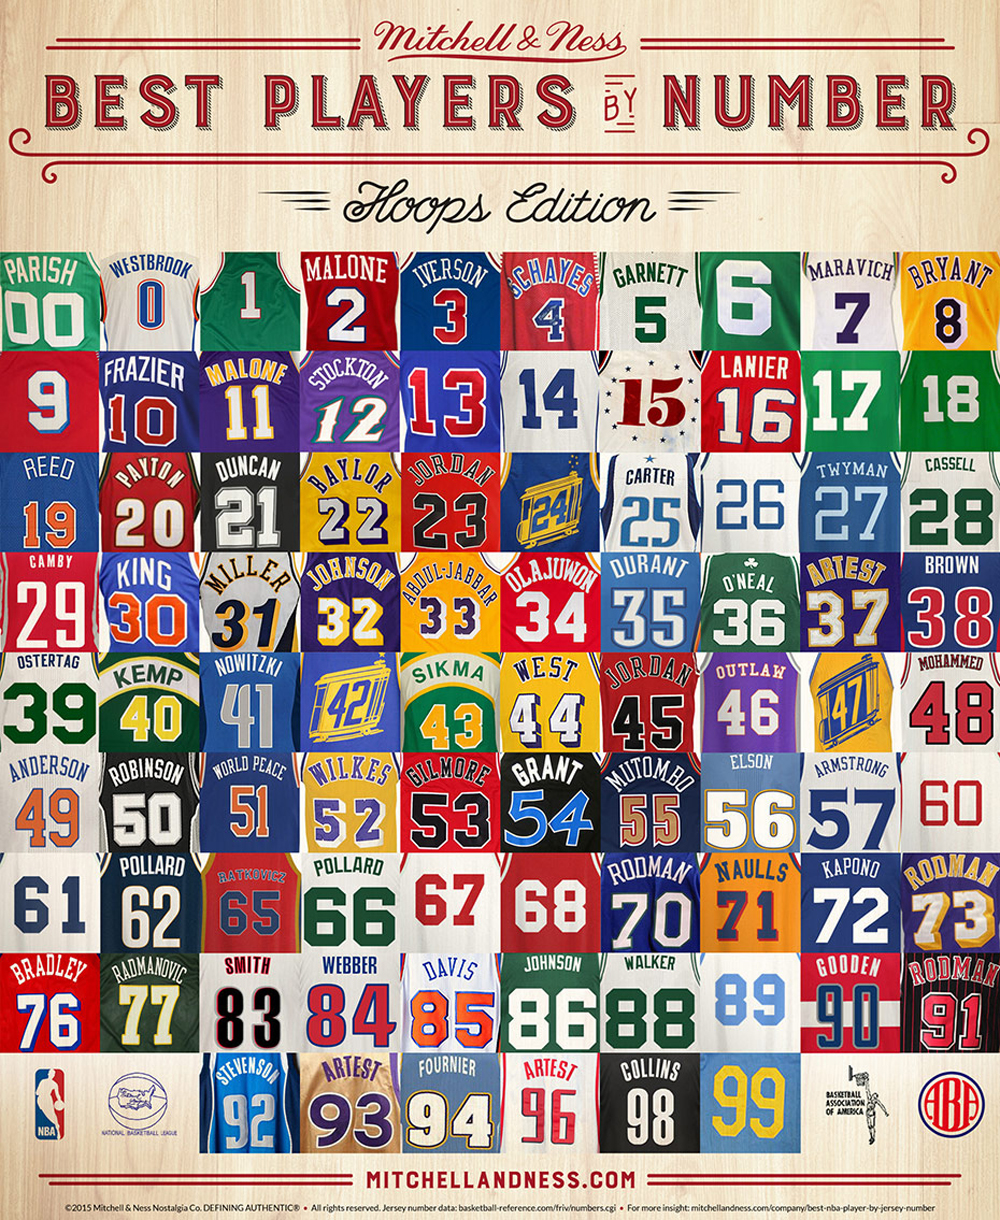 Greatest NBA Player to wear each jersey number 00-99